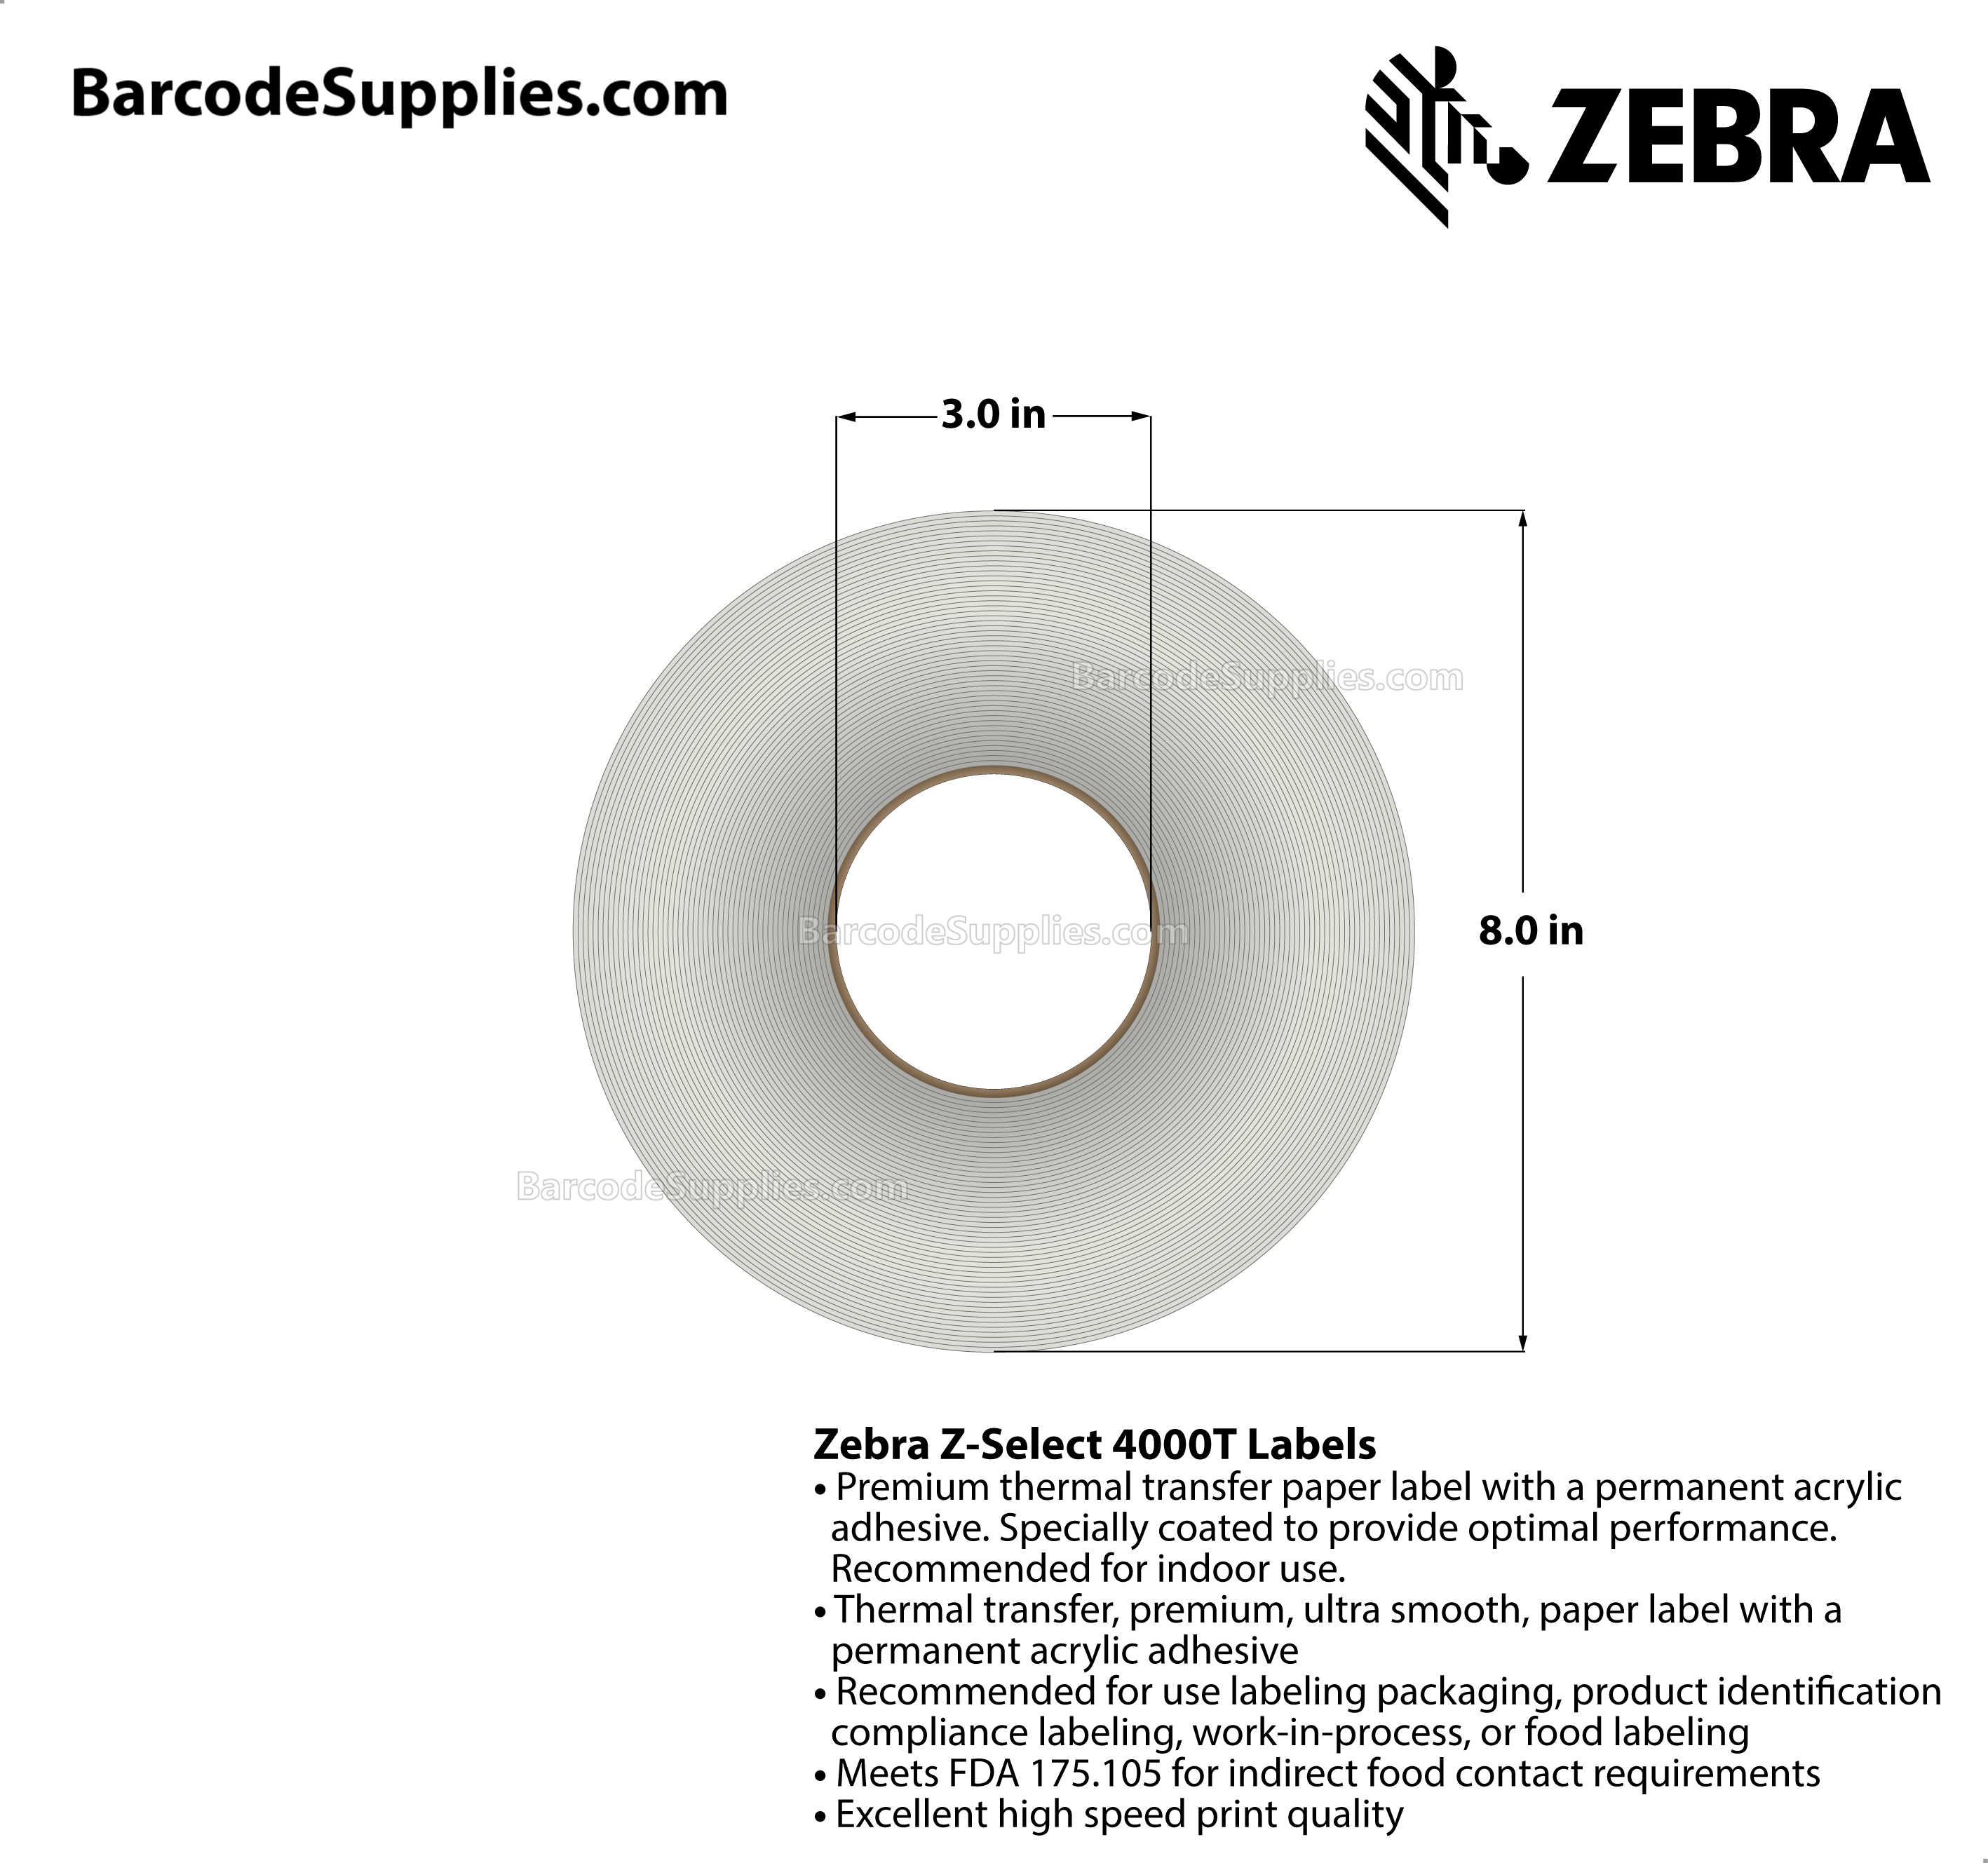 4 x 1 Thermal Transfer White Z-Select 4000T Labels With Permanent Adhesive - Perforated - 4970 Labels Per Roll - Carton Of 4 Rolls - 19880 Labels Total - MPN: 92071